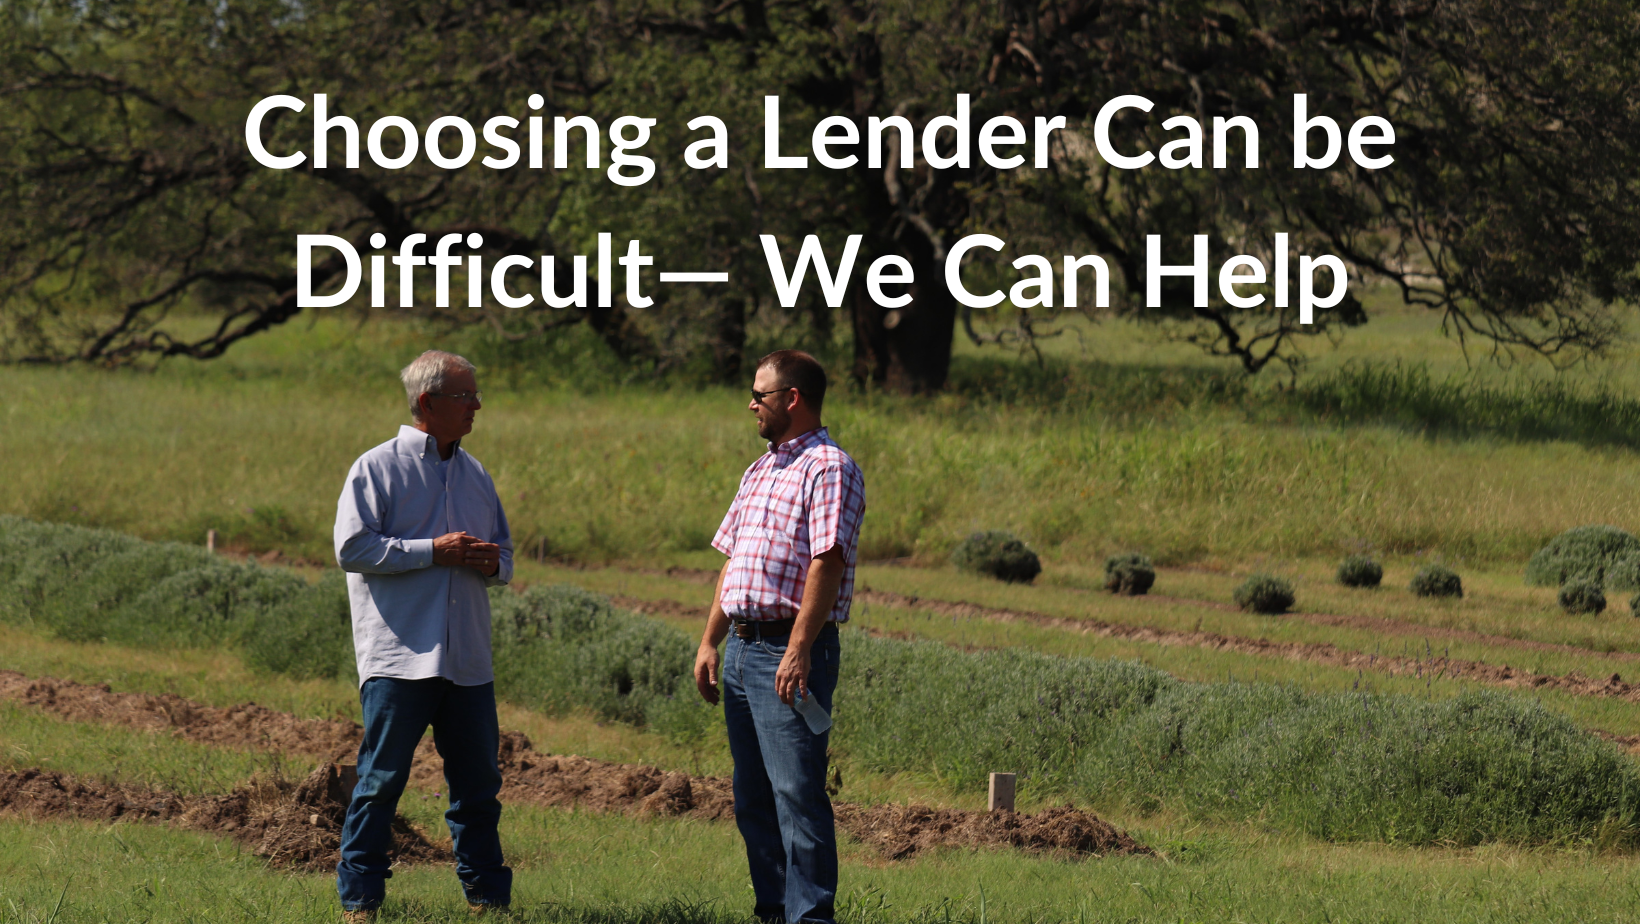 Choosing a Lender Can be Difficult— We Can Help